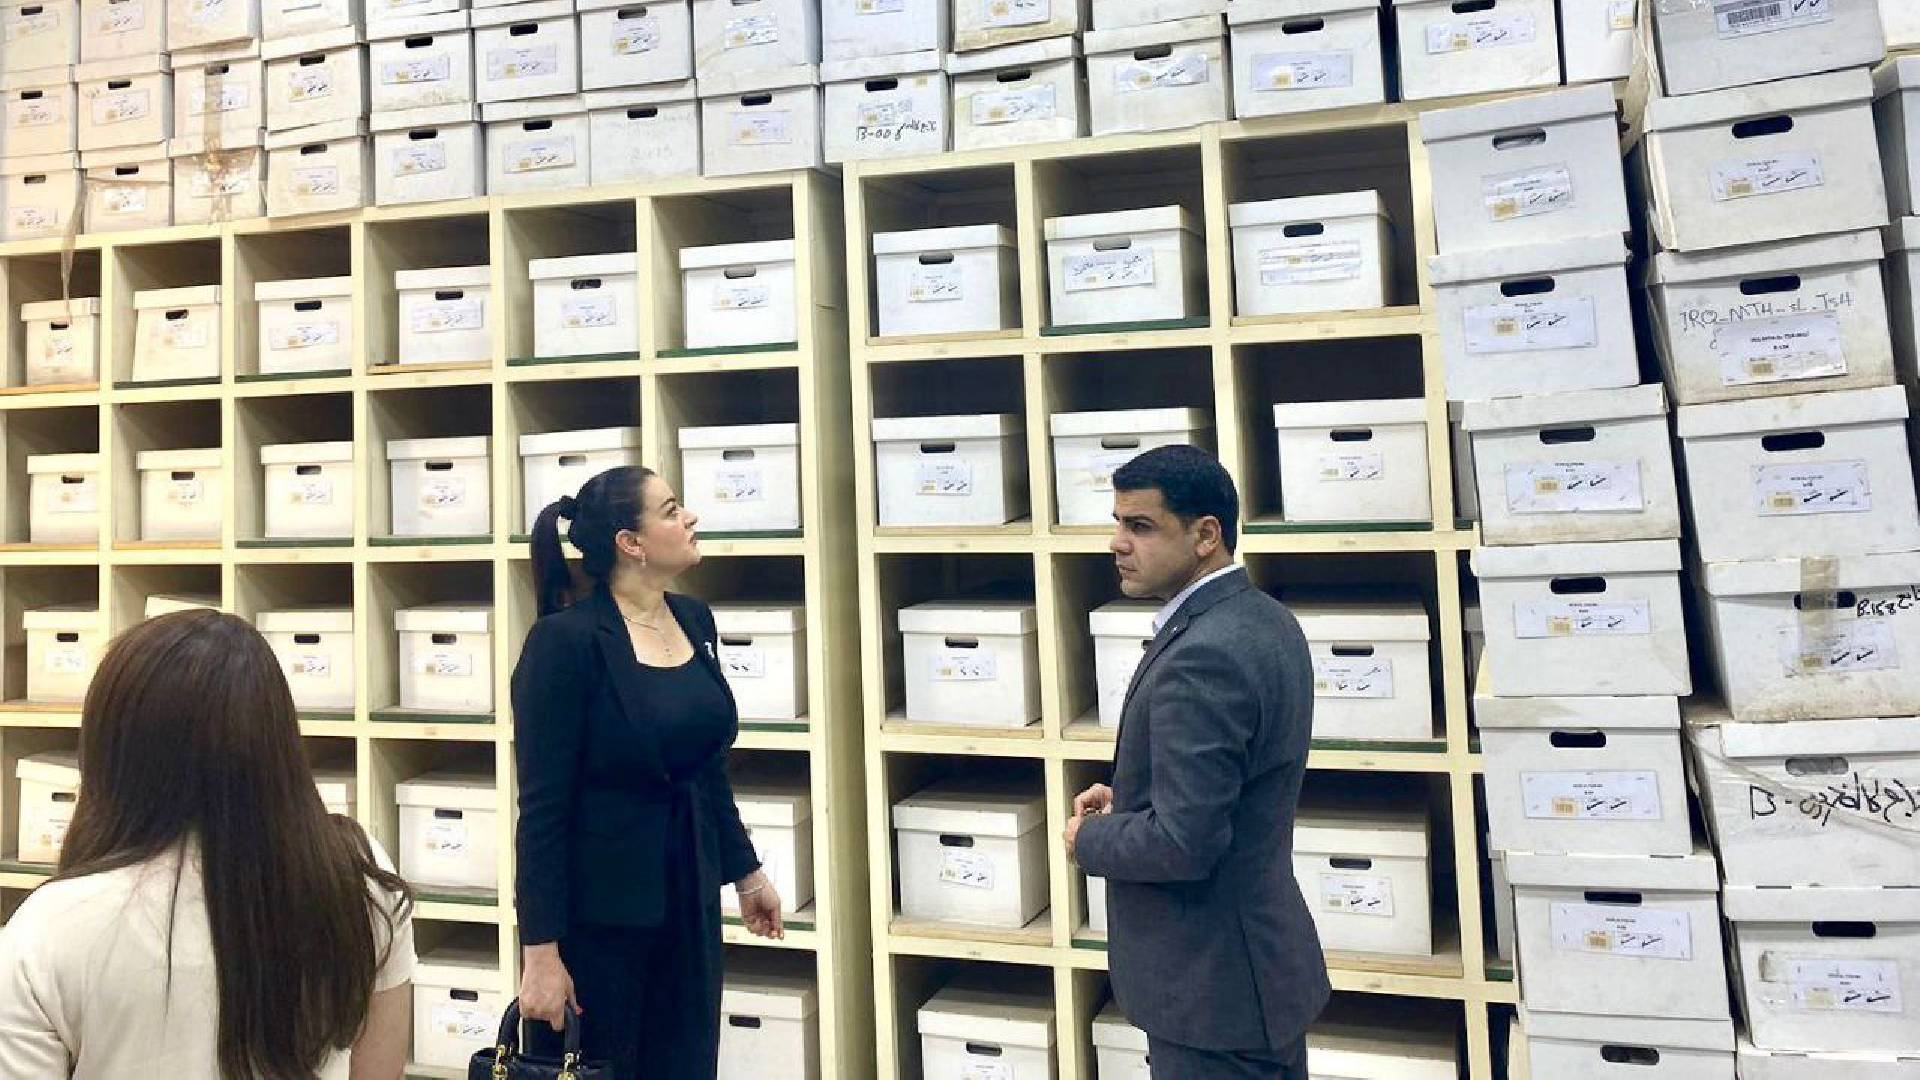  MPs Karwan Yarwais and Suzan Mansour looking at the boxes which contain the remains of the Anfal victims.